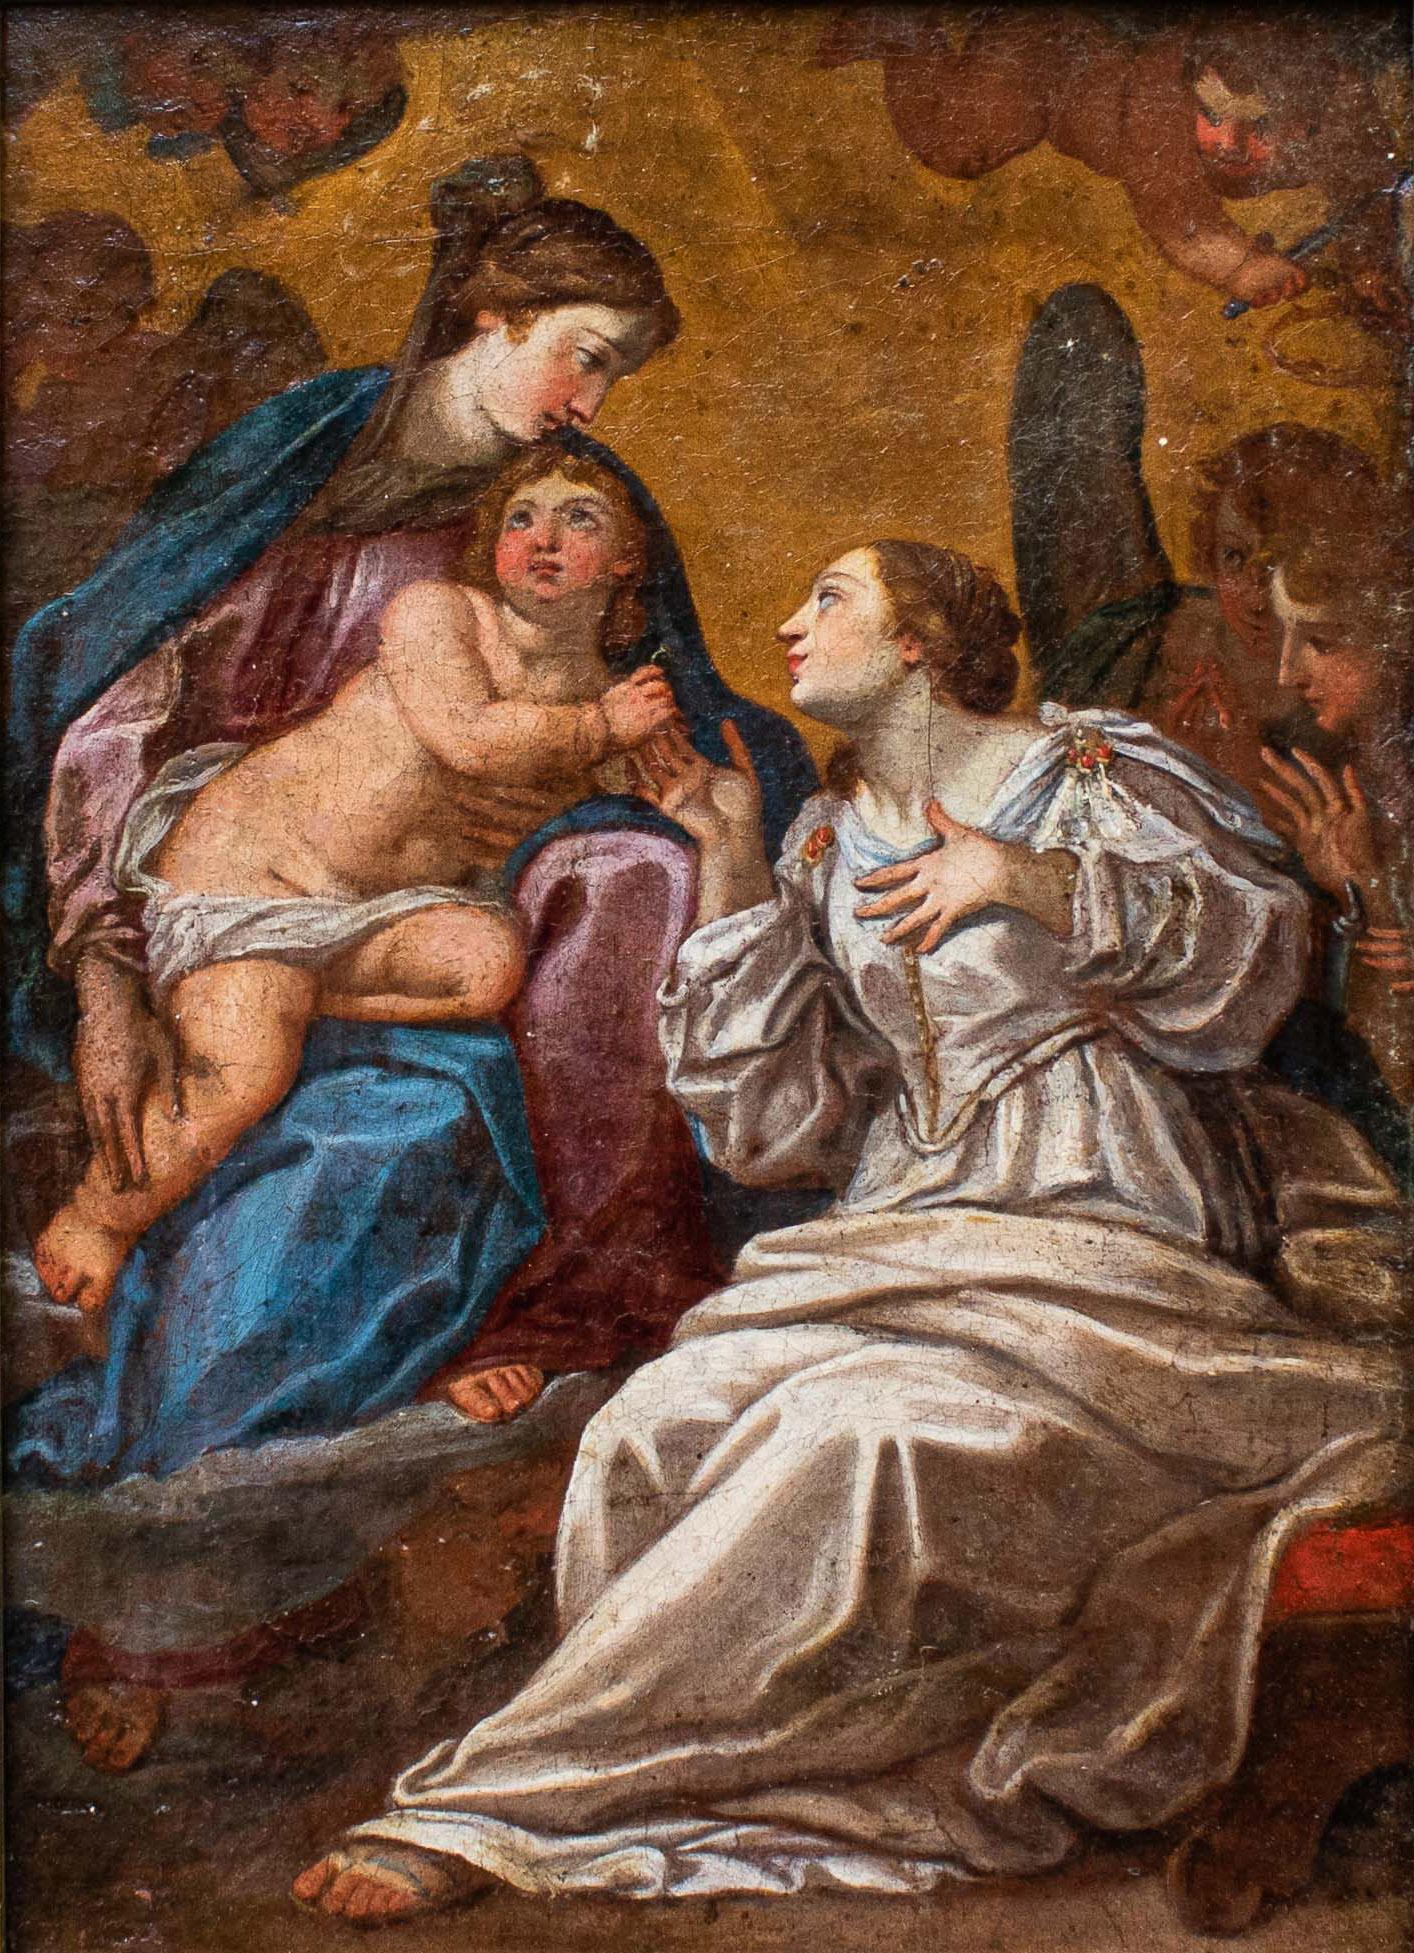 17th century, Roman School
Mystical marriage of Saint Catherine of Alexandria
Oil on canvas, 32 x 23 cm
Frame cm 45 x 36

The saint is depicted in front of the Virgin holding the Child portrayed with the wedding ring in his hand, enriched with